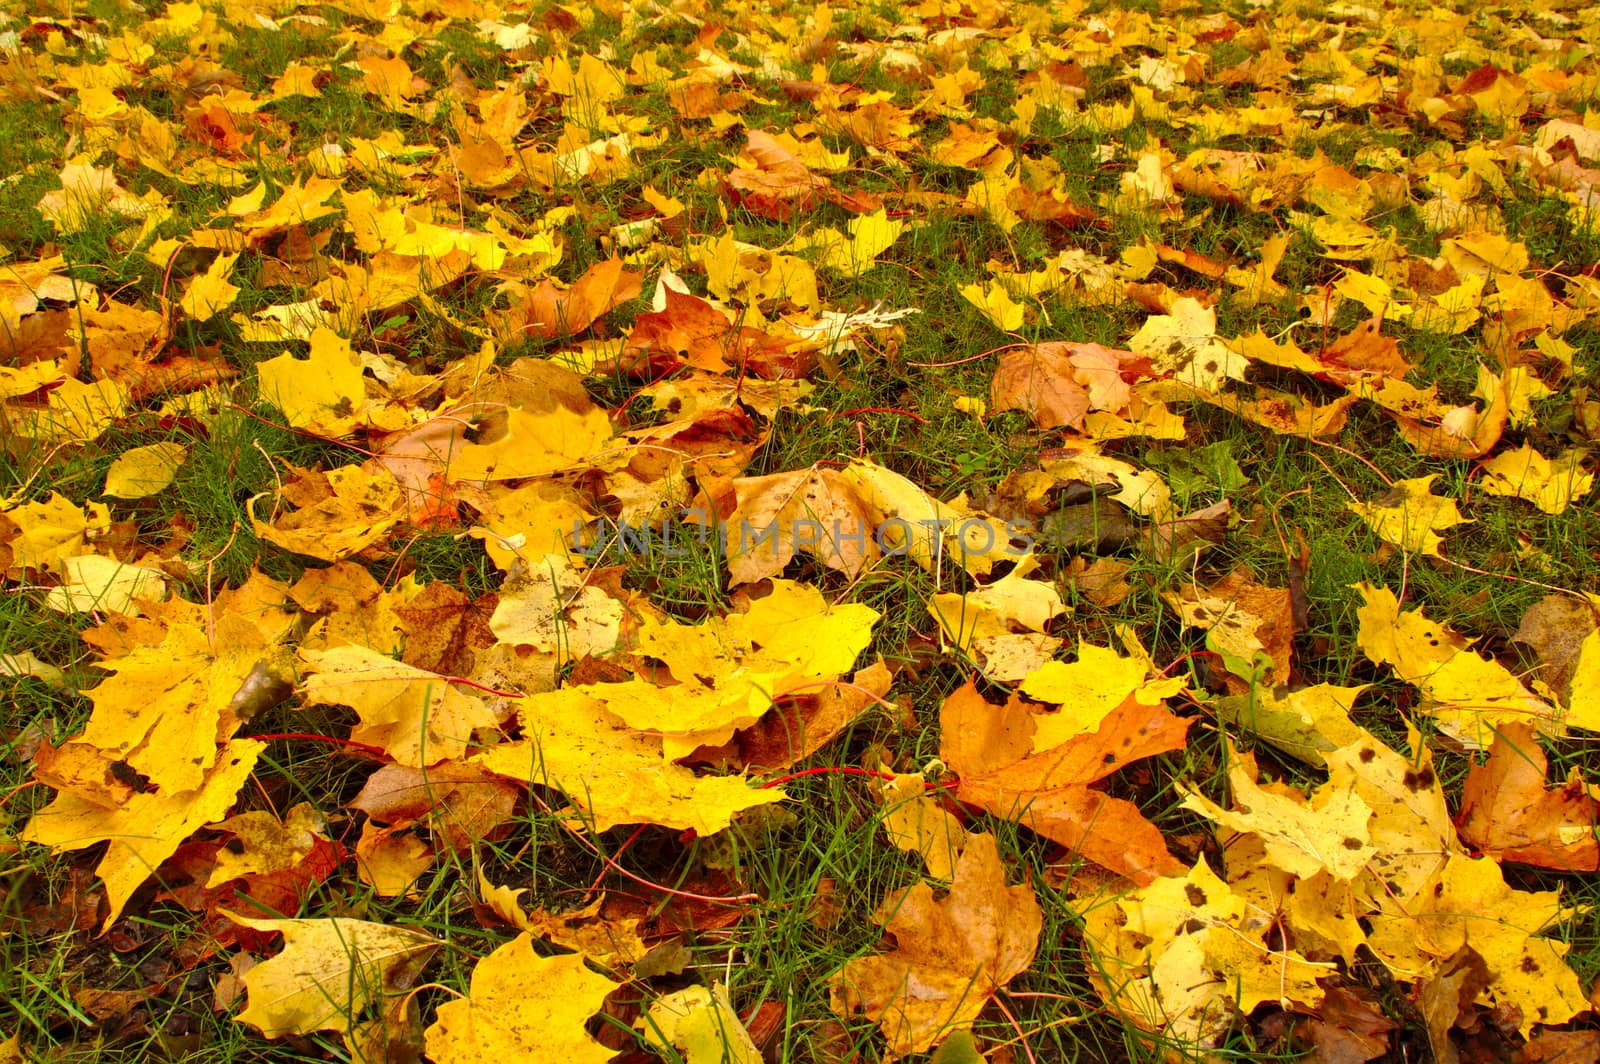 Lawn covered with colorful maple leaves in autumn